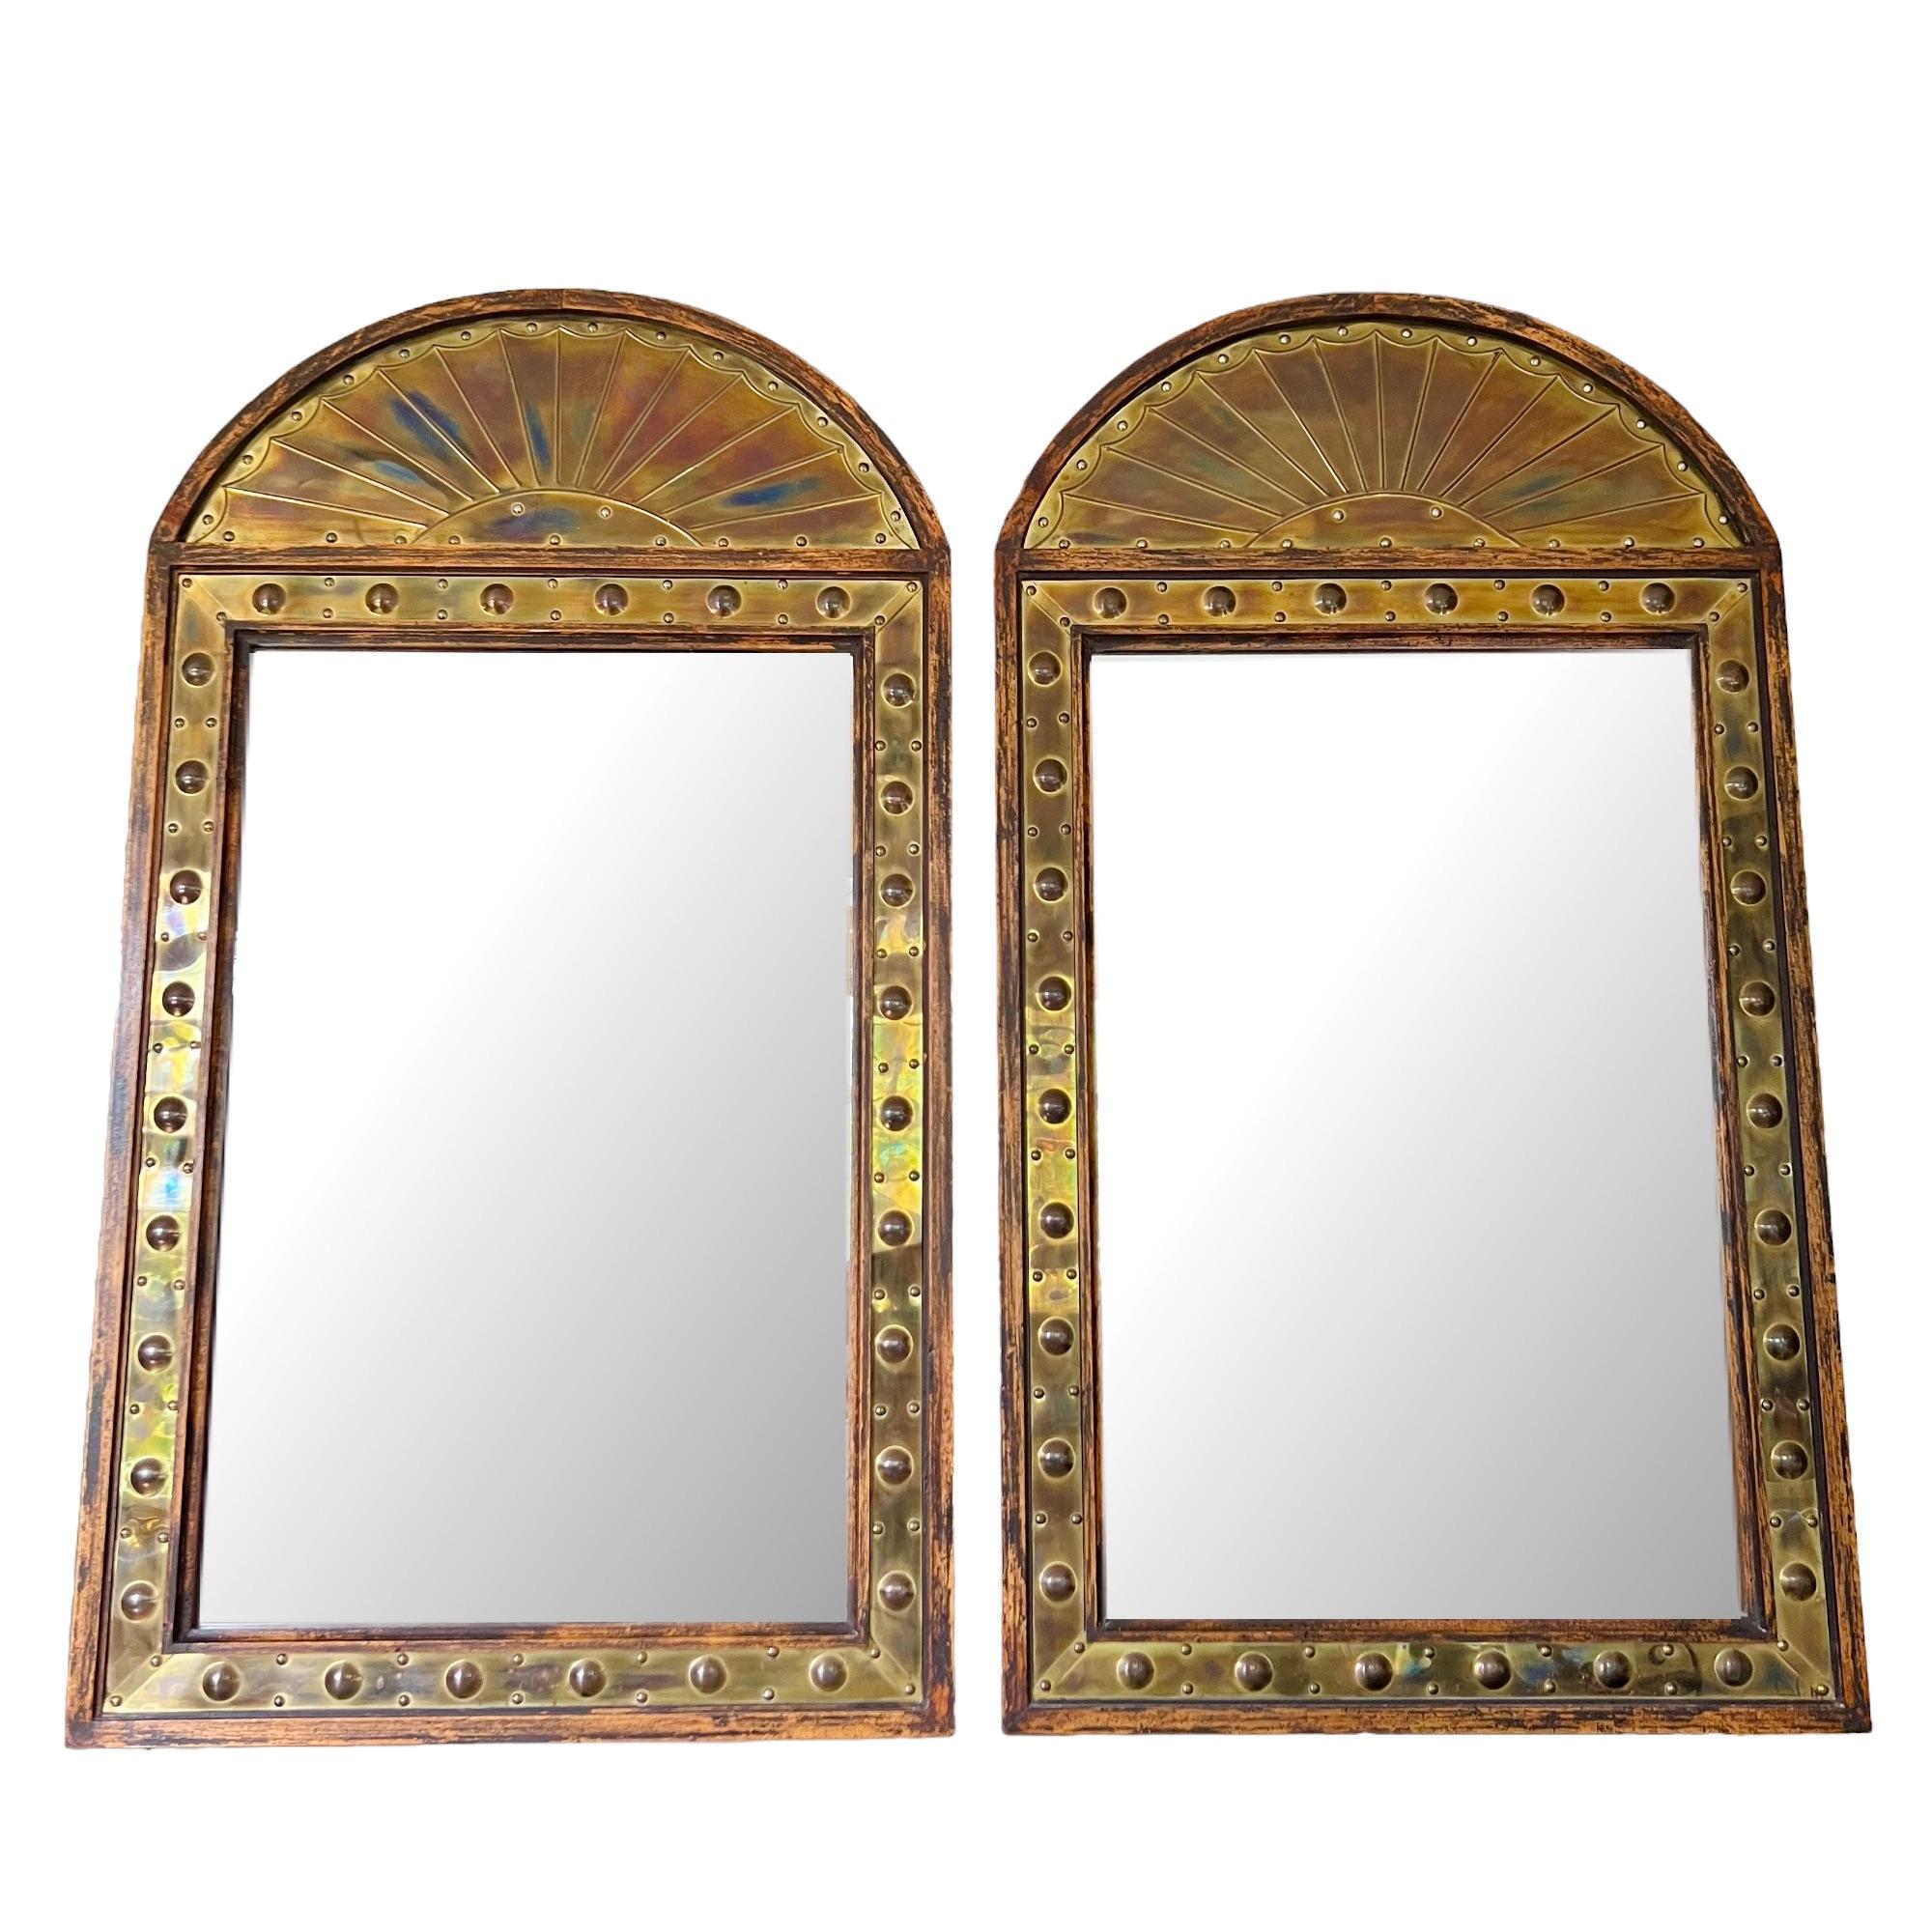 A vintage pair of Italian brass clad and wood framed arched wall mirrors by Sarreid Ltd circa 1970's. Spanish style design featuring studded brass repoussé panels and fan detail dome top set in patinated wood framing.

Dimensions: 24